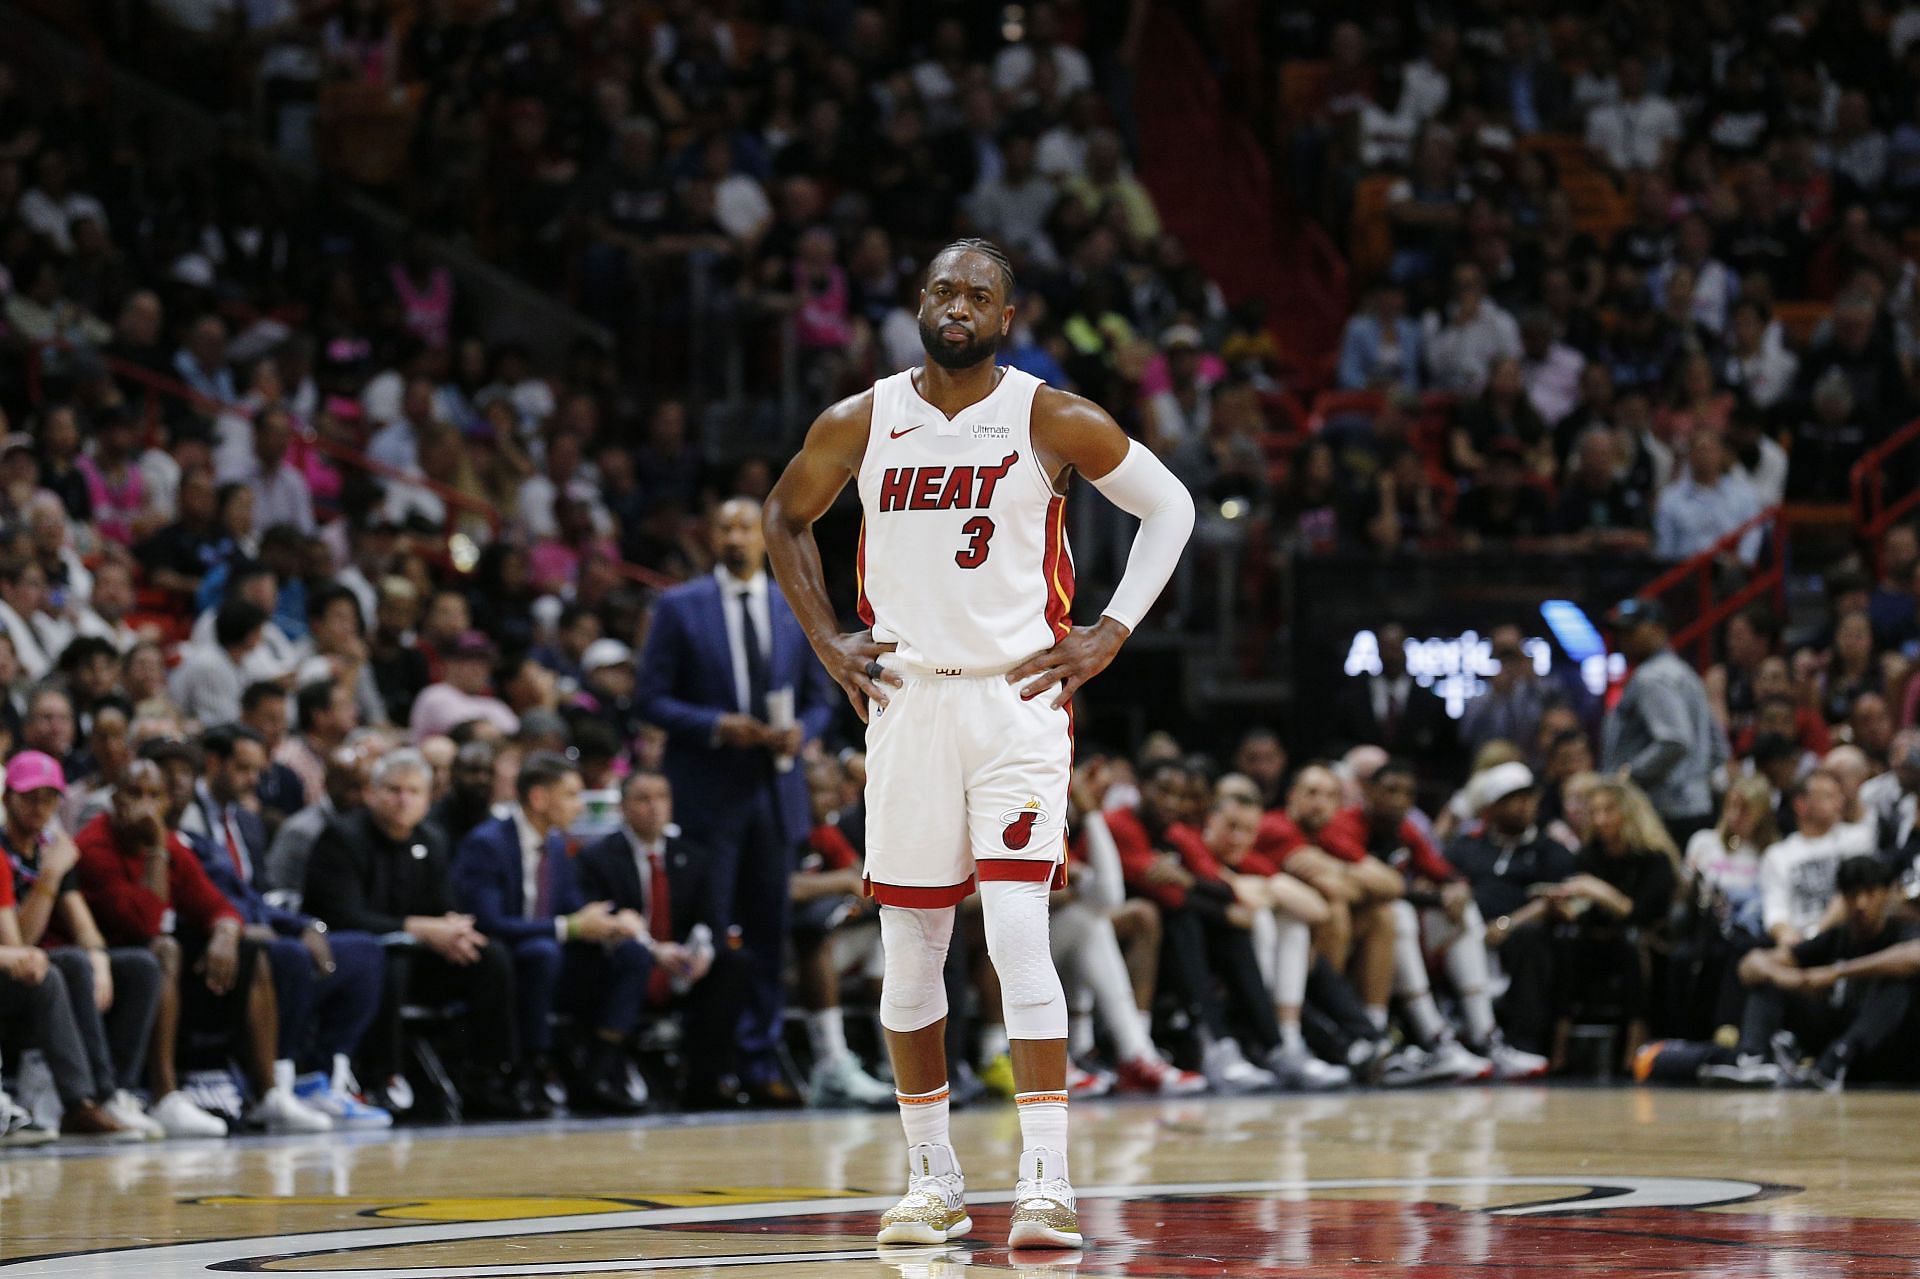 Dwyane Wade during his playing days as a member of the Miami Heat